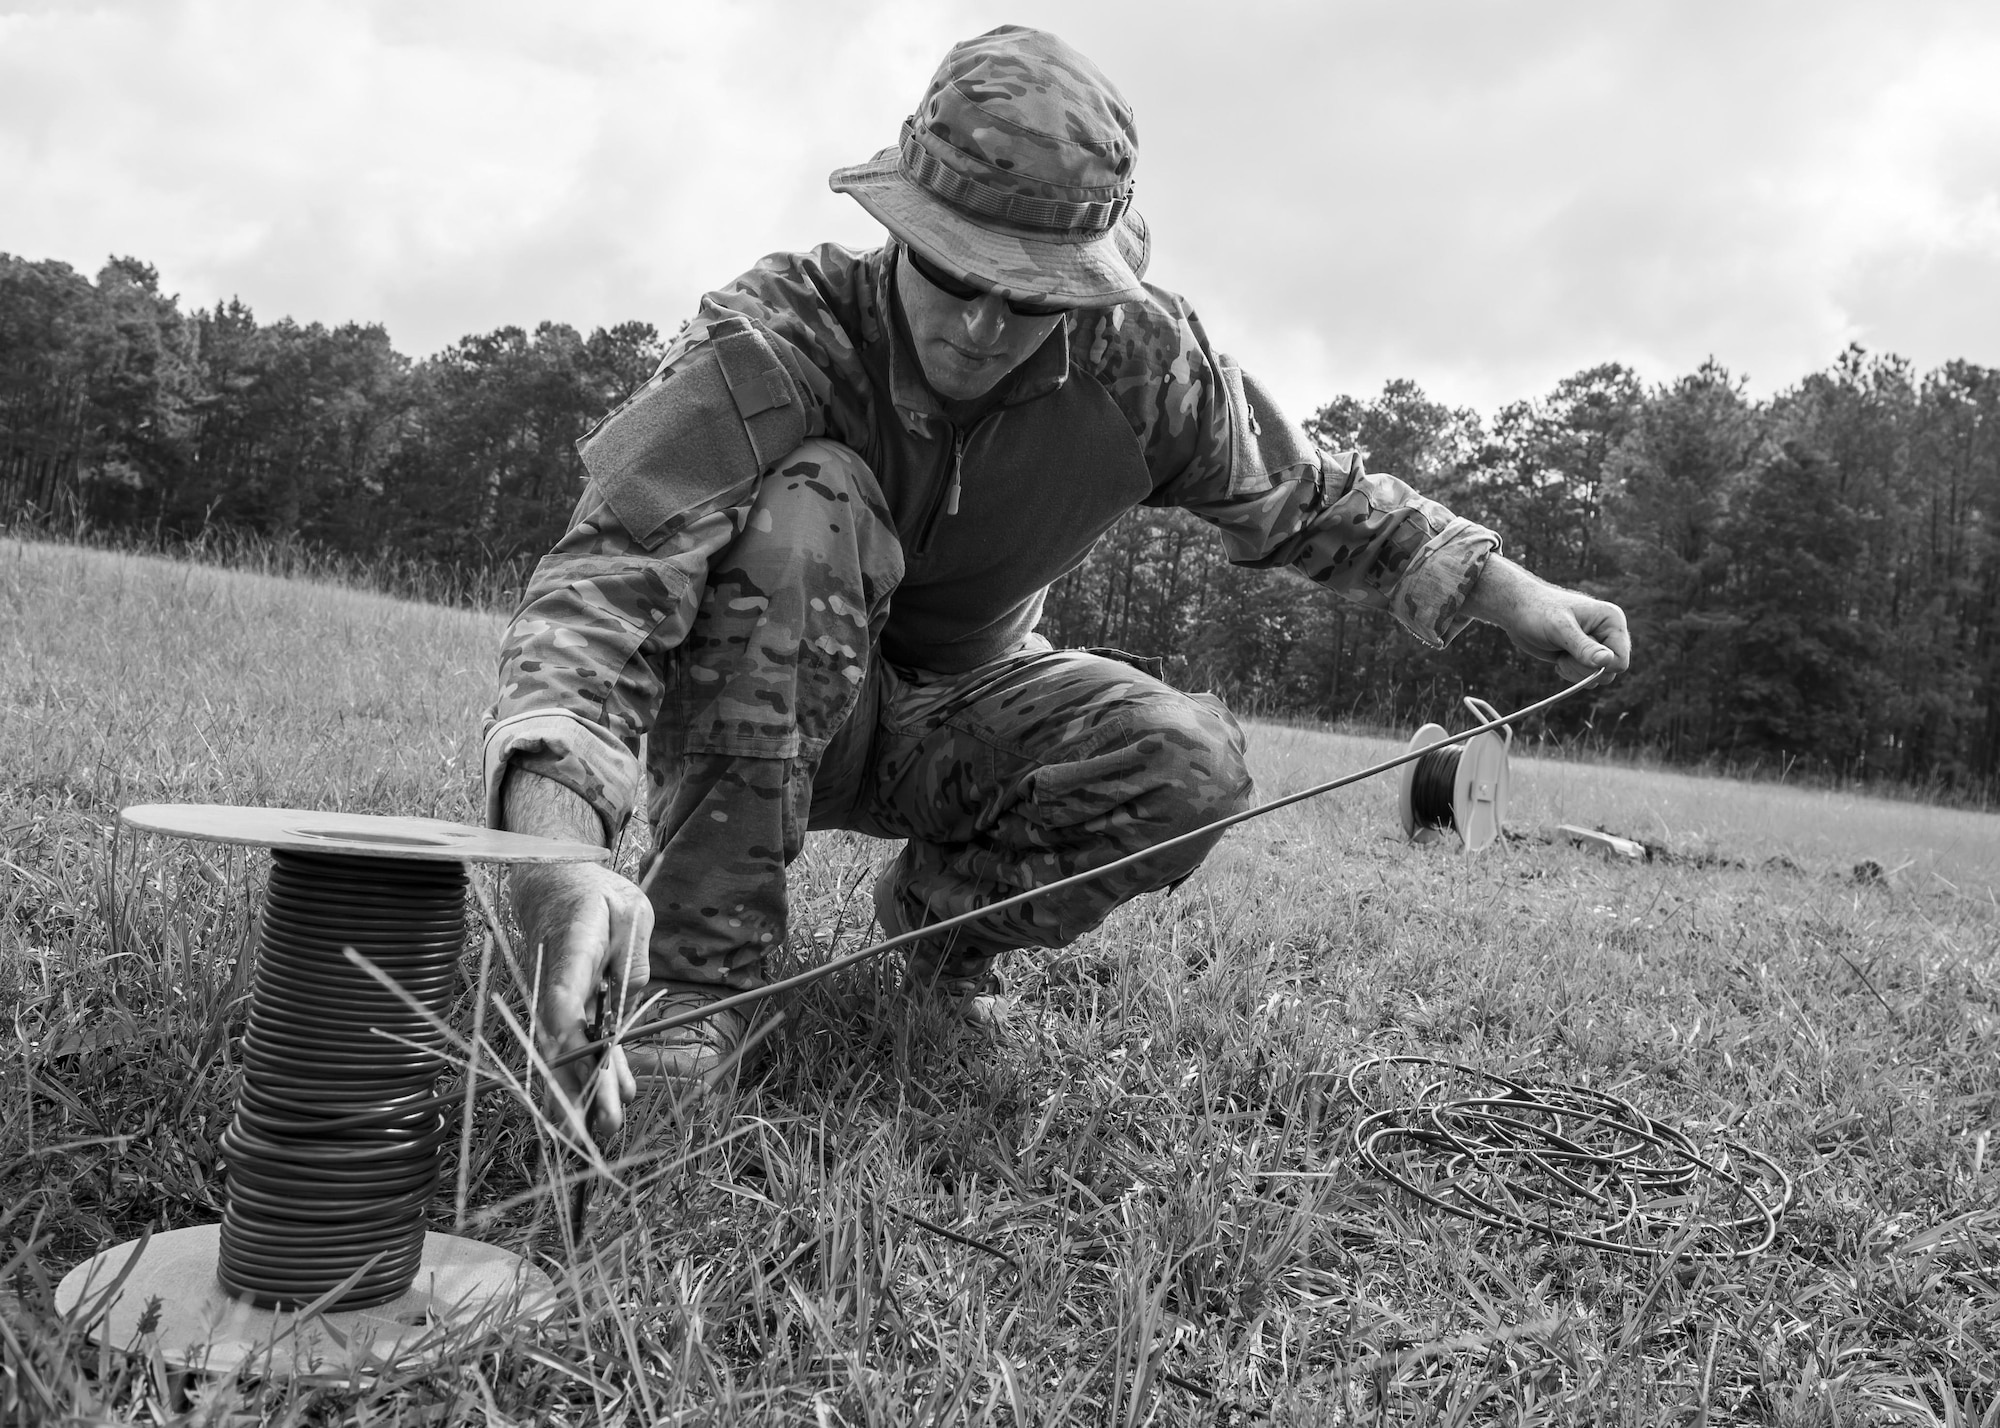 Tech. Sgt. Brenden McCavey, 315th Civil Engineering flight Explosive Ordnance Disposal technician, cuts a detonation cord, Aug. 3, 2016 at Joint Base Charleston – Weapons Station, S.C. The joint post-blast analysis training exercise included 22 participants from the Kentucky Air National Guard, South Carolina Air National Guard, Army South Carolina Guard, MacDill Air Force Base, Fla. Seymour Johnson Air Force Base, N.C., 628th Civil Engineering Squadron and 315th CEF. The trainees honed their skills of collecting evidence after an IED attack. (U.S. Air Force photo/Staff Sgt. Jared Trimarchi)